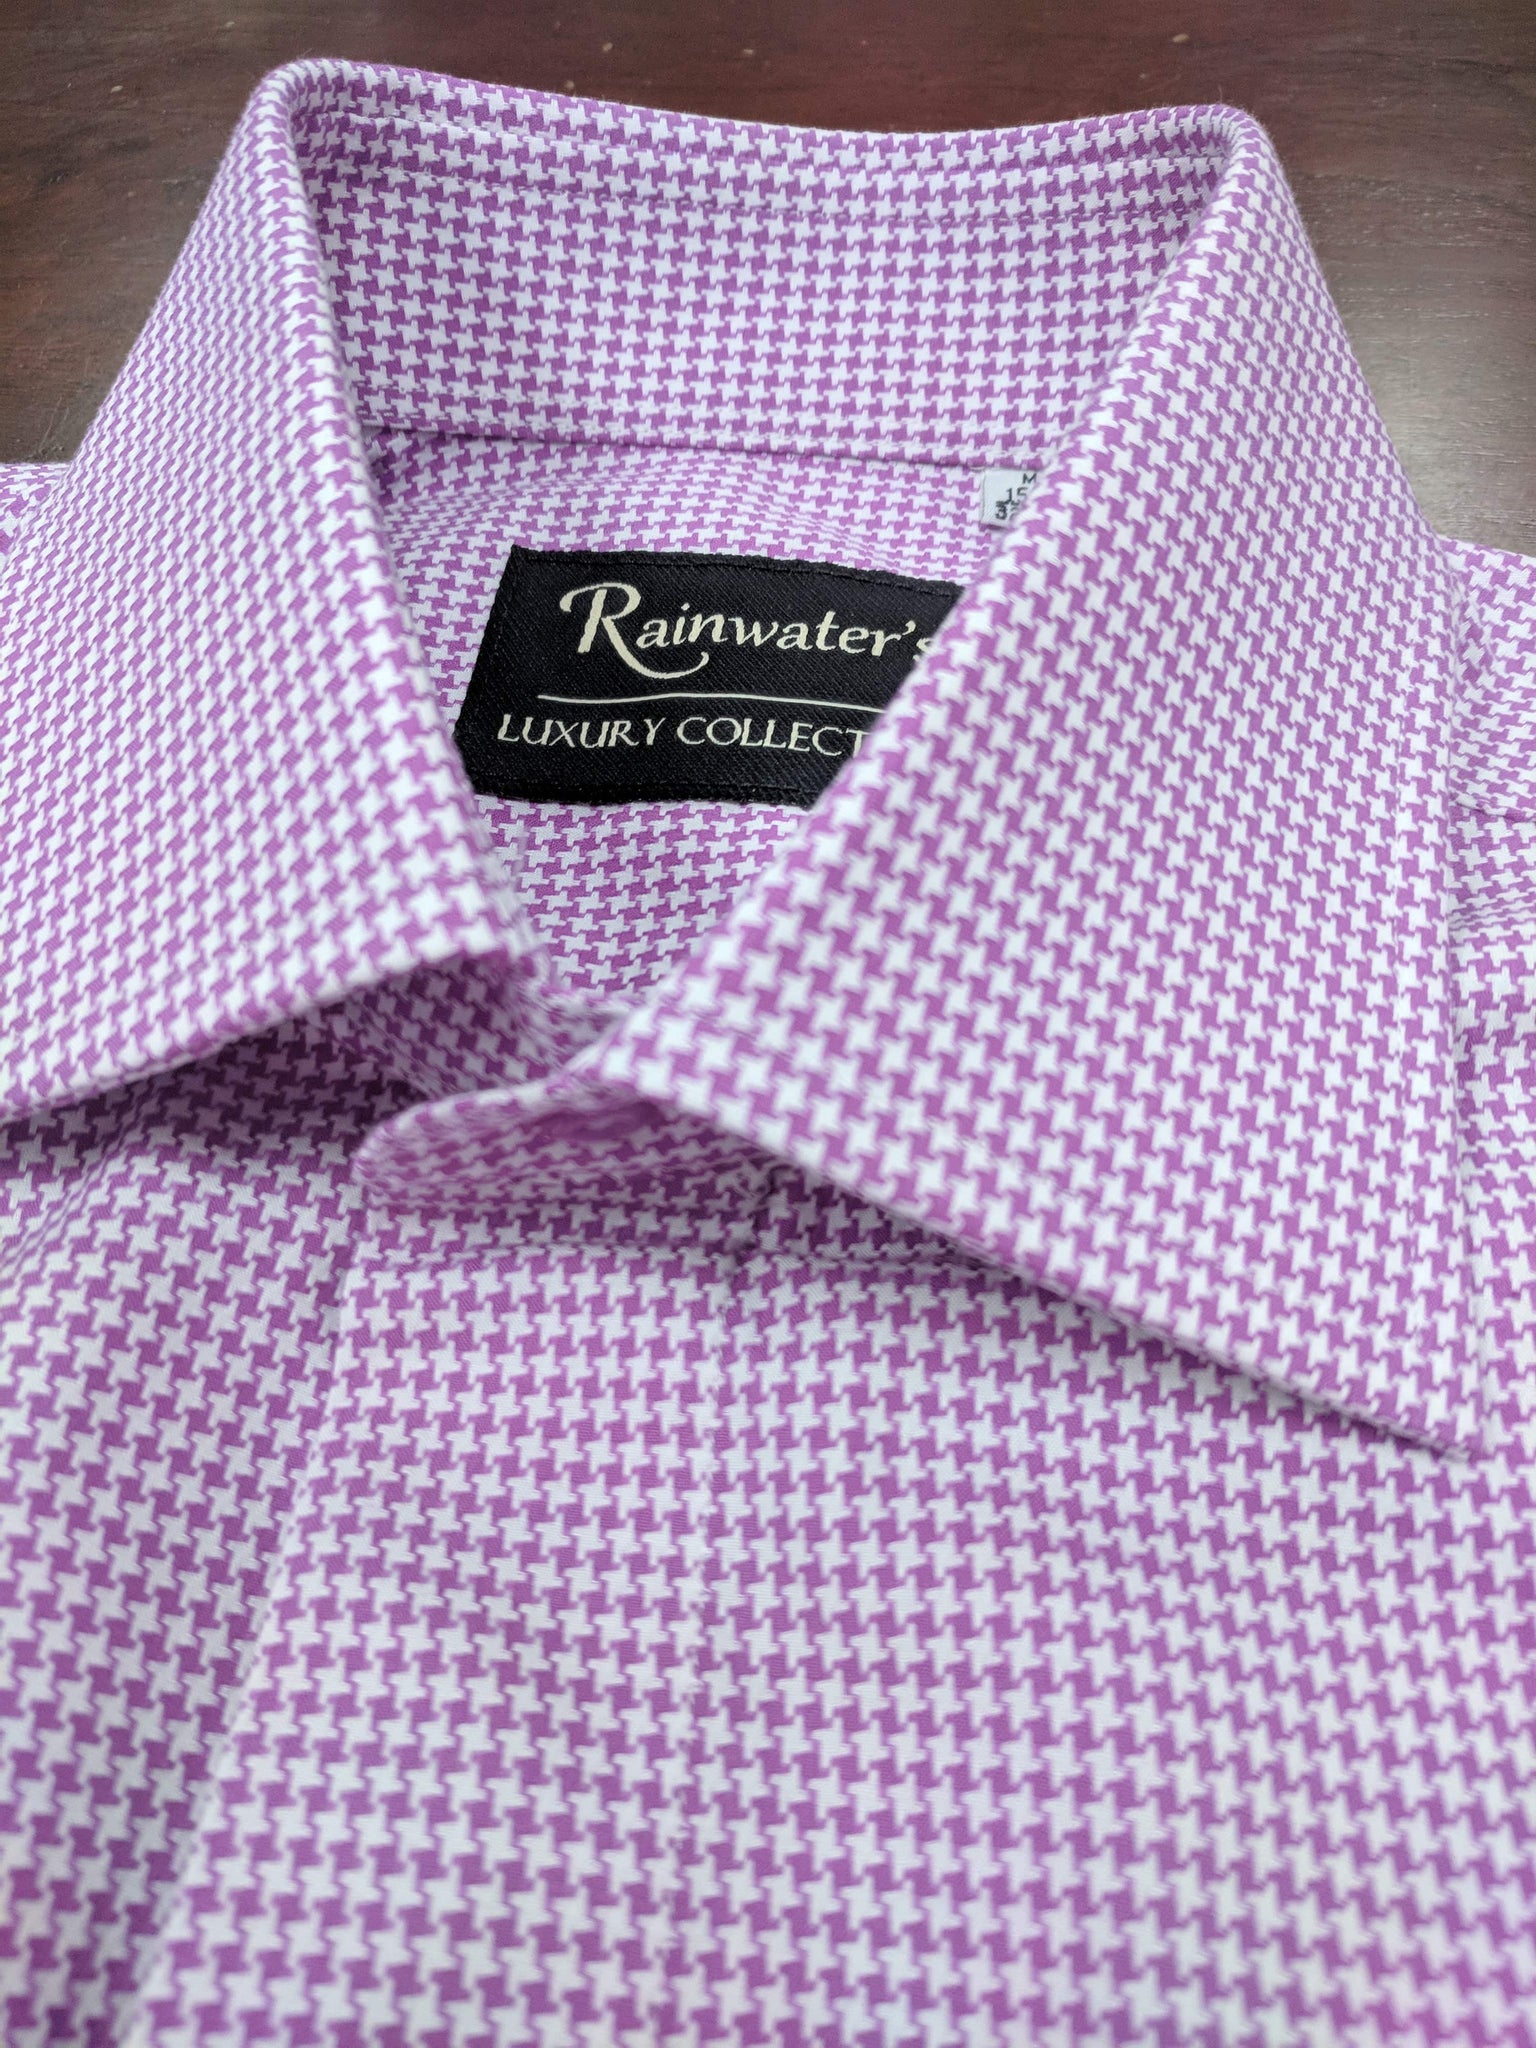 Rainwater's Violet Houndstooth French Cuff Dress Shirt - Rainwater's Men's Clothing and Tuxedo Rental